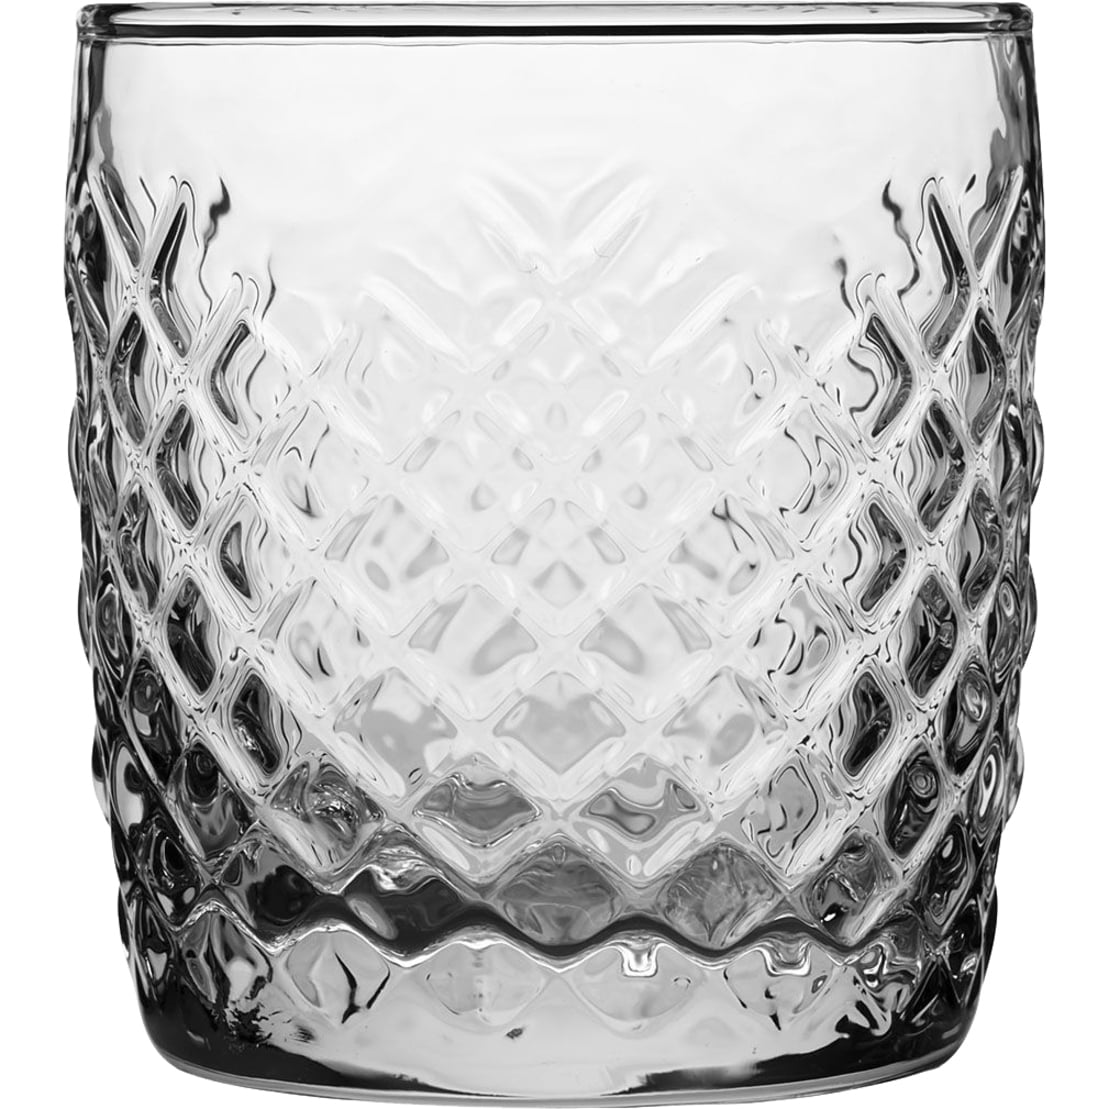 Anchor Hocking Rio 16-Piece Drinkware Set, Size: 8-10.5 oz and 8-16oz, Clear